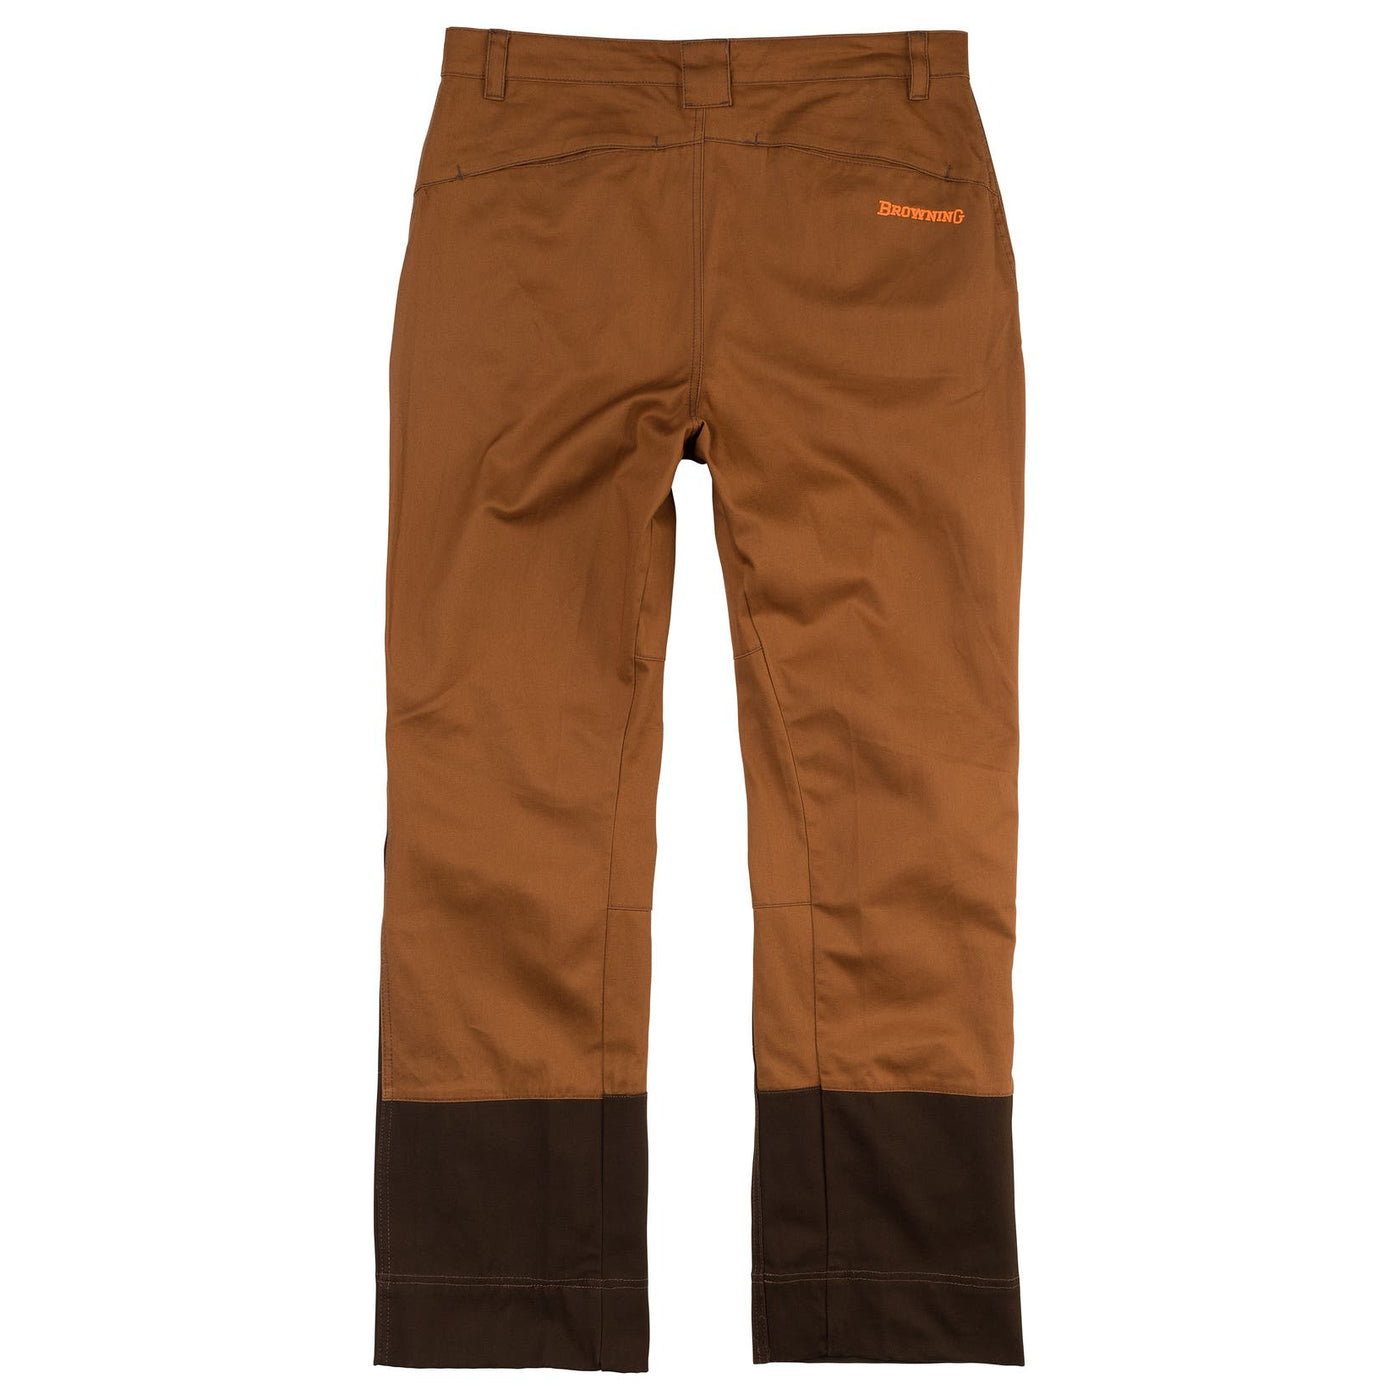 Browning Upland Denim Pant-Men's Clothing-Kevin's Fine Outdoor Gear & Apparel